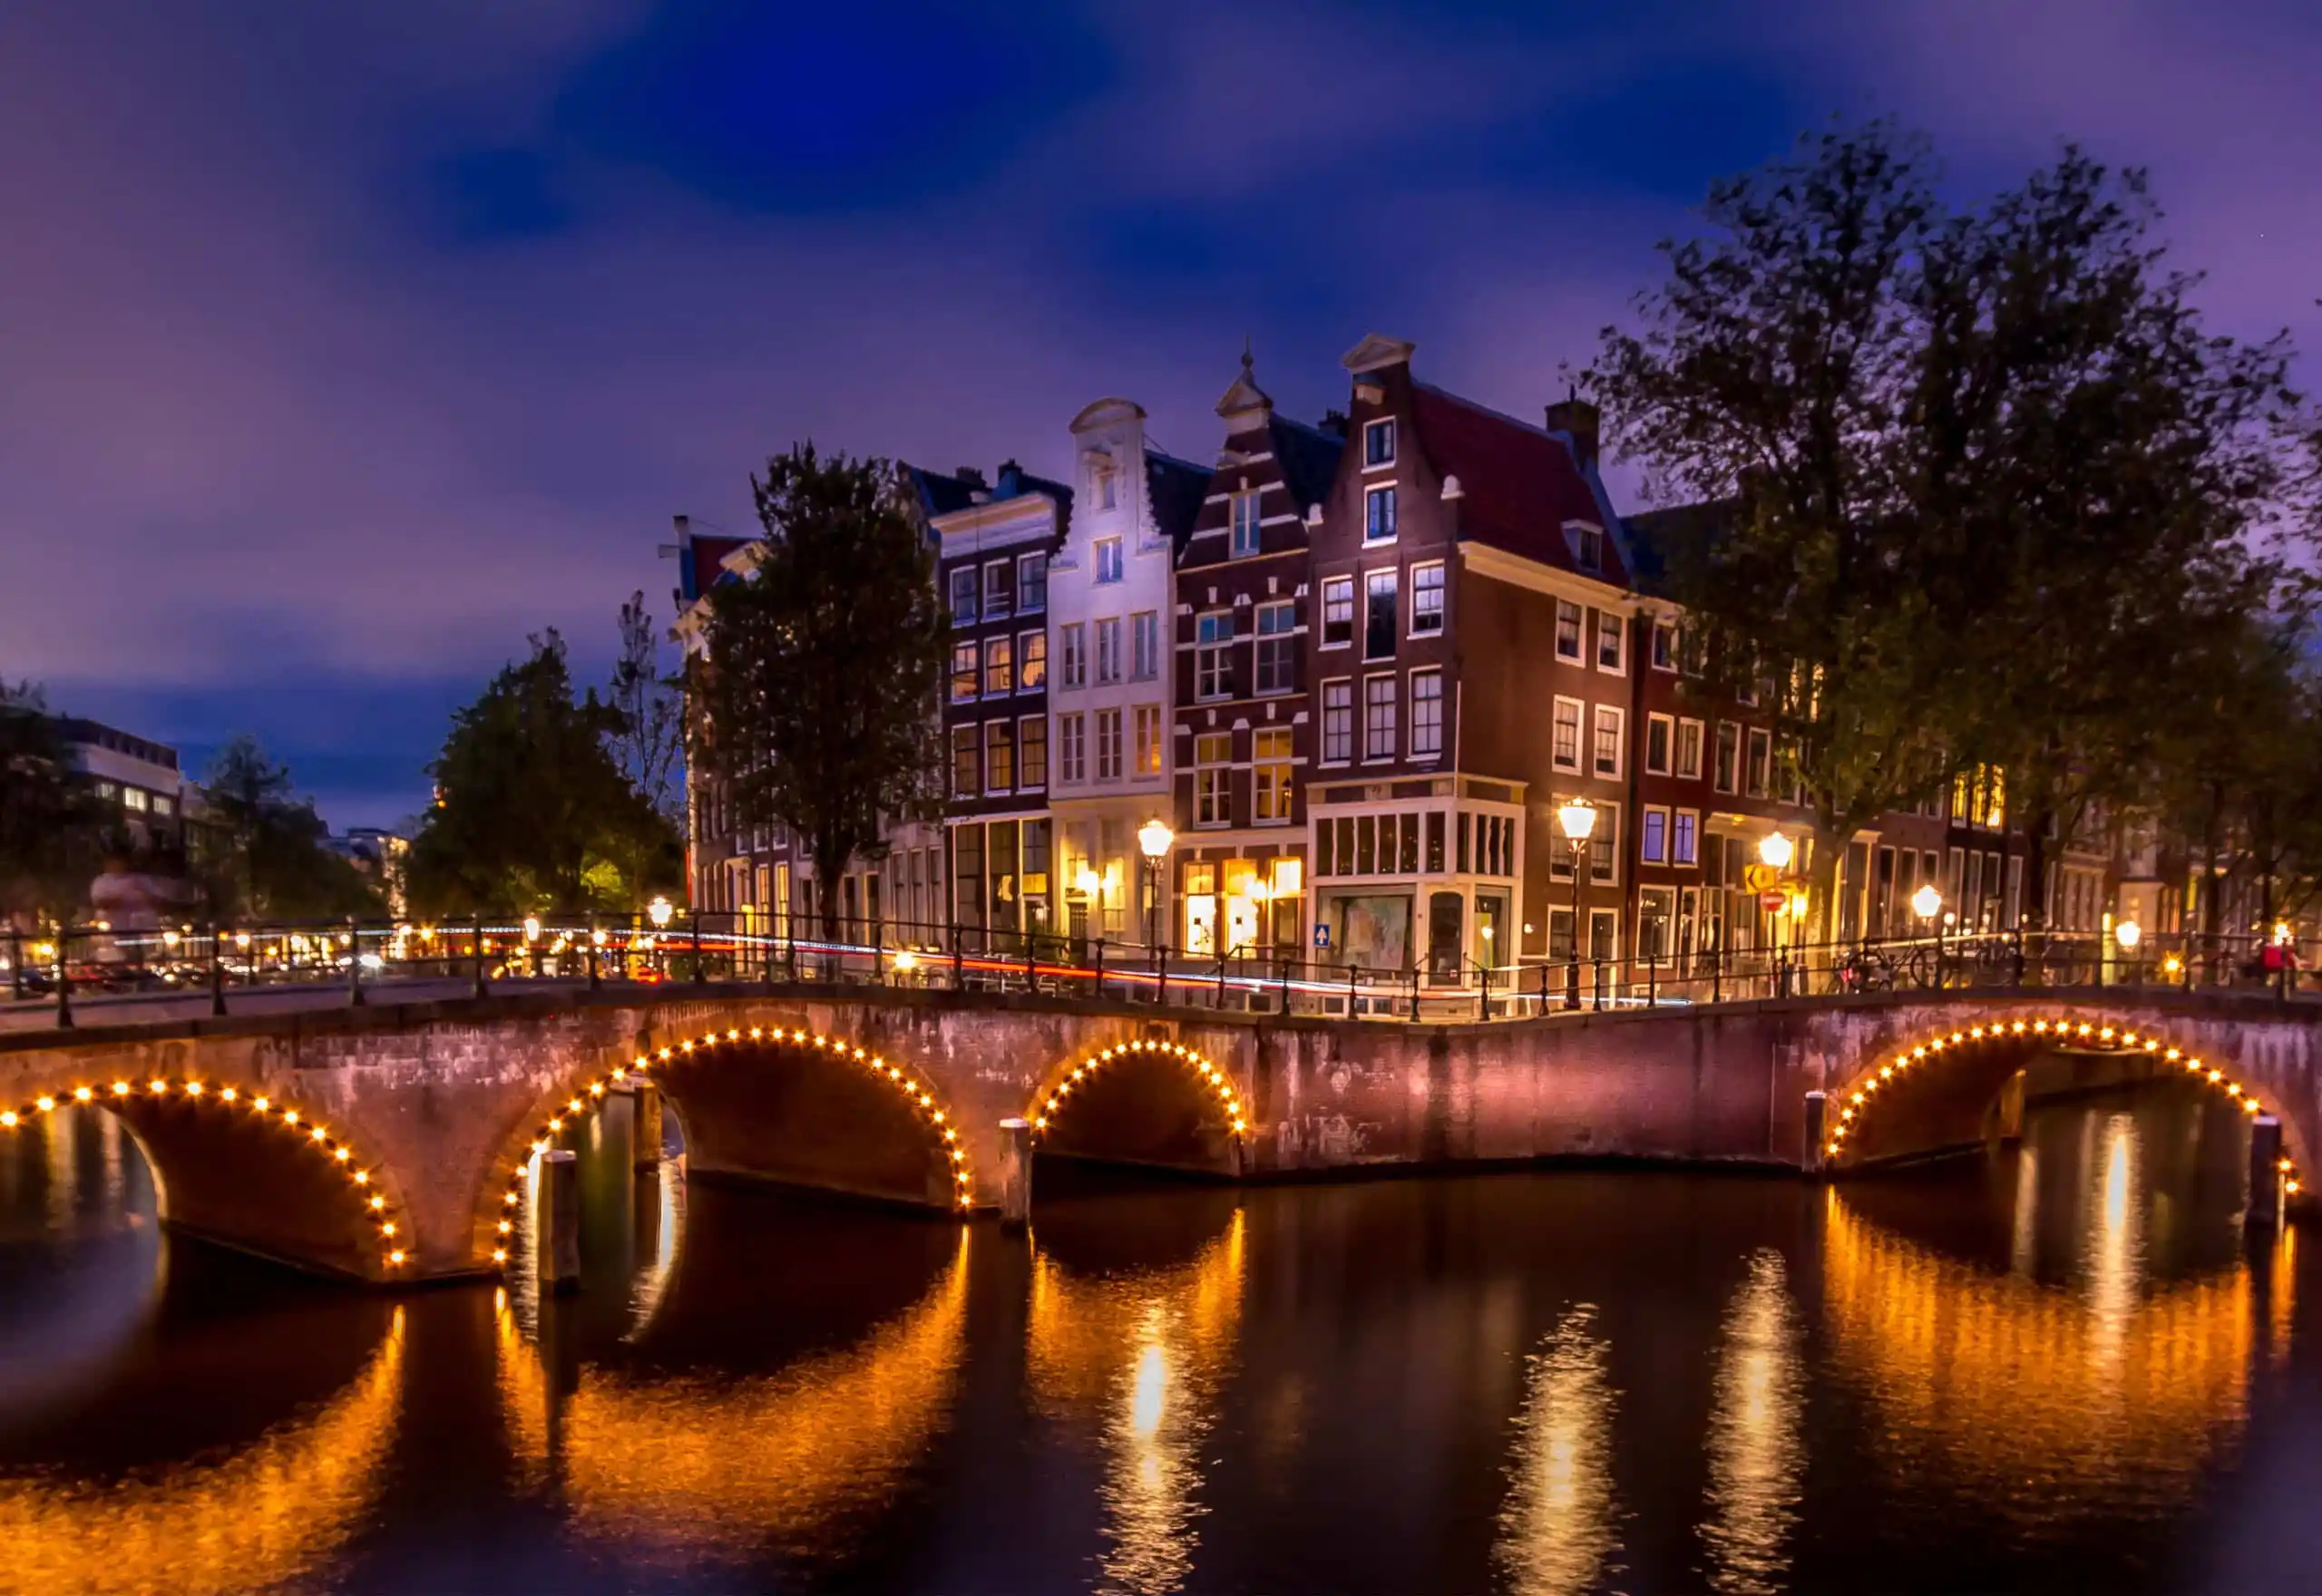 Human Resource Management Courses in Amsterdam